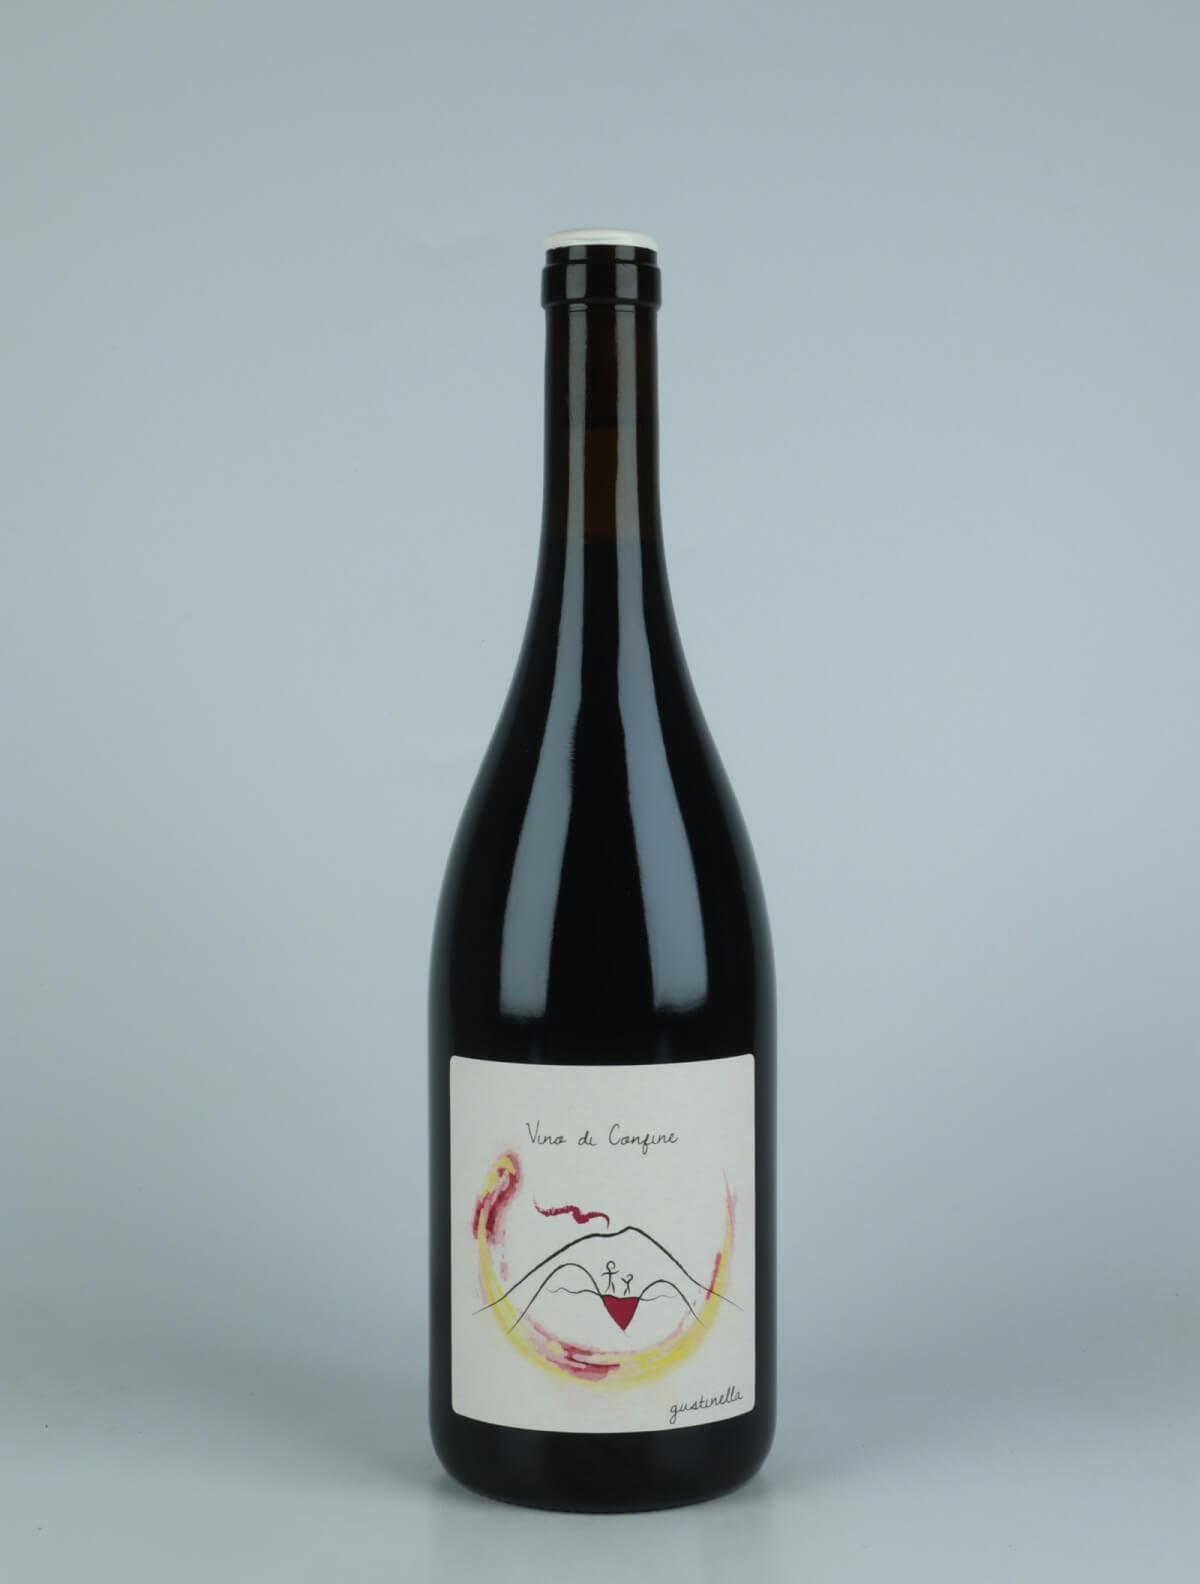 A bottle 2022 Vino di Confine Red wine from Gustinella, Sicily in Italy